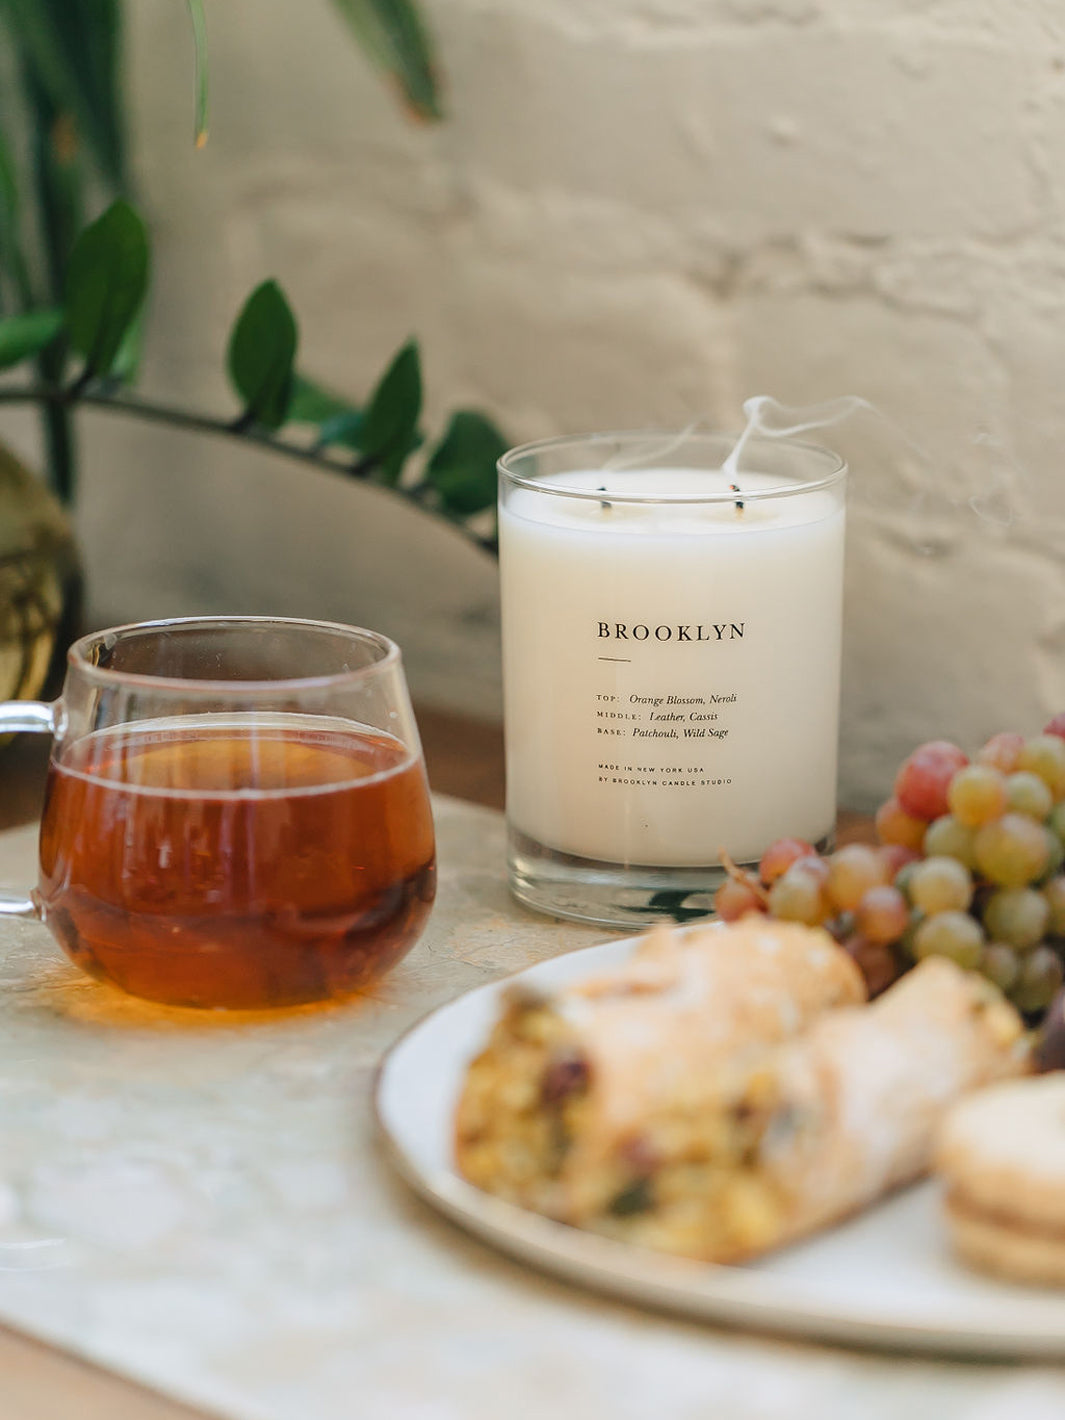 Brooklyn Escapist Candle | Leather / Spice